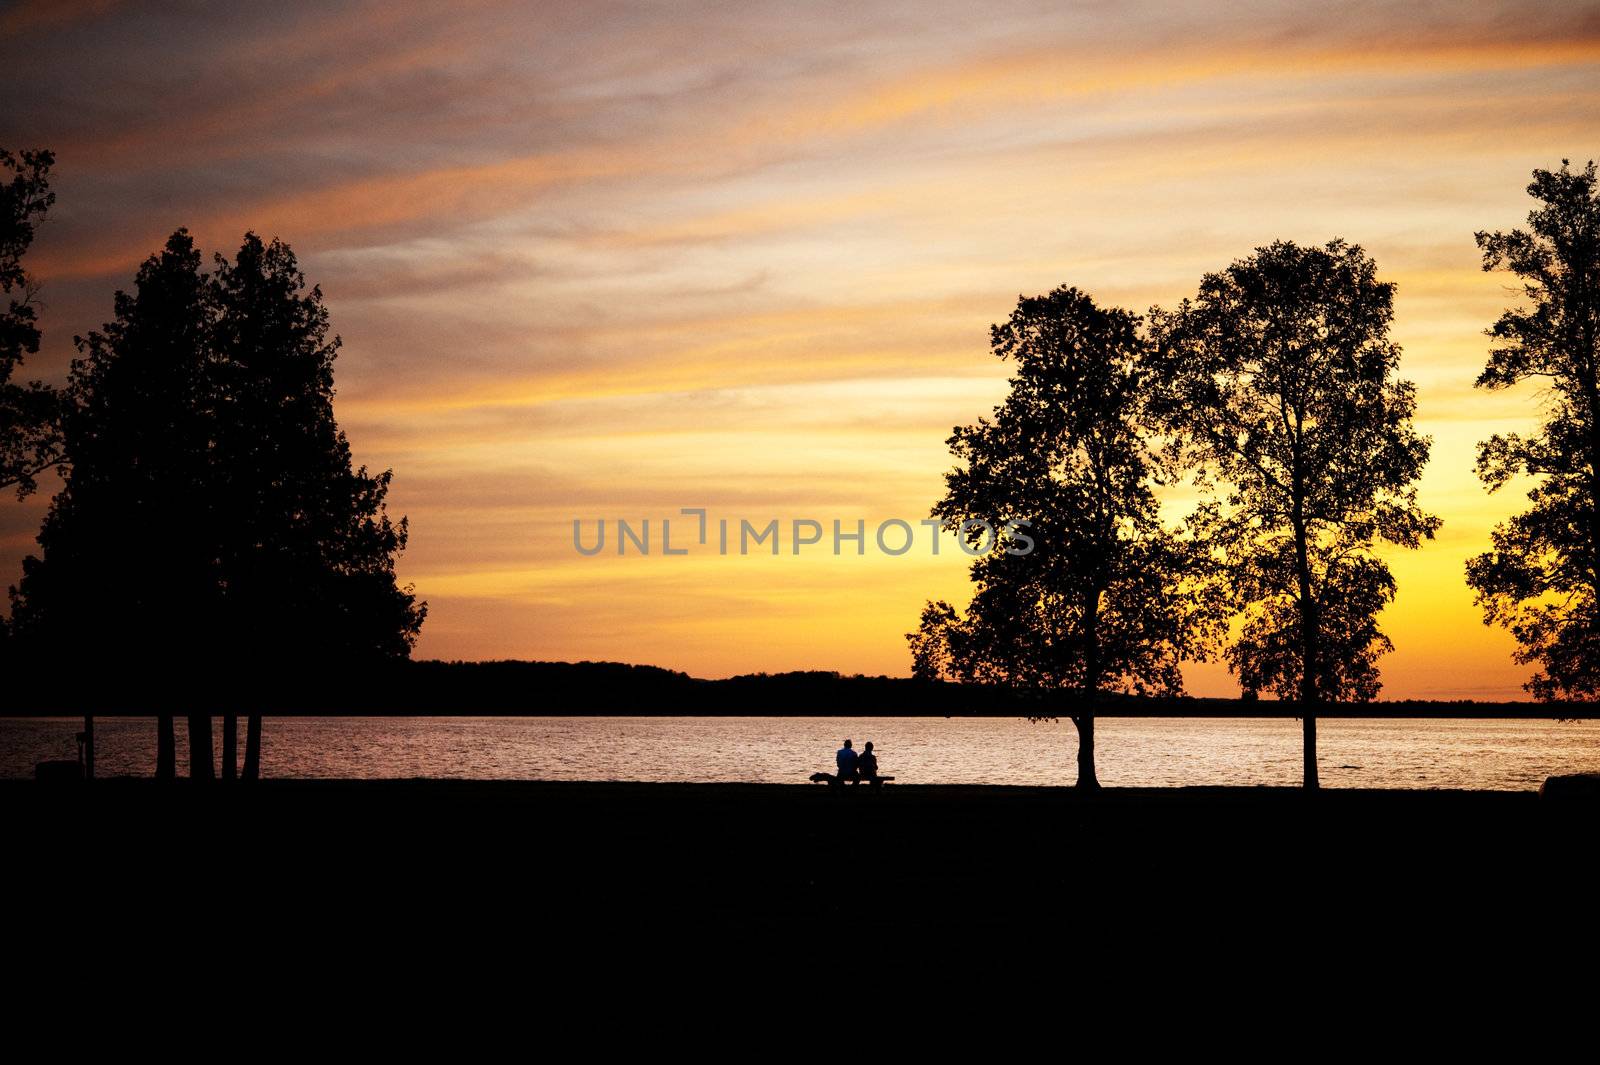 Elderly couple sitting on a bench by lake at sunset by gregory21